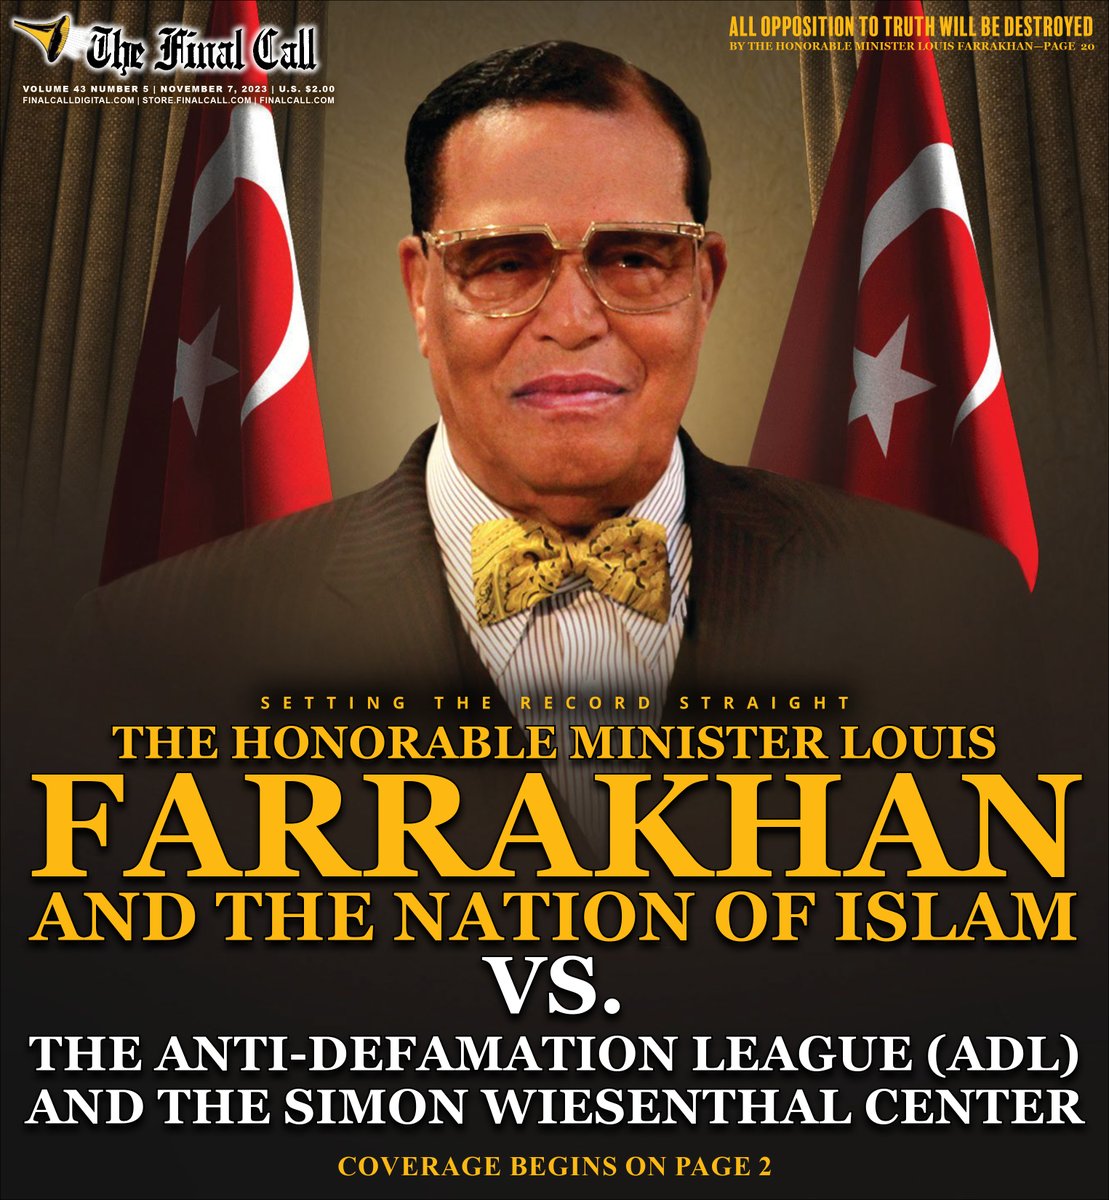 Our desire, now, is to state our case before the courts and before the world. We are not what they have said we are and we intend to prove such. new.finalcall.com/2023/10/31/the… #NOIvsADL #Farrakhan